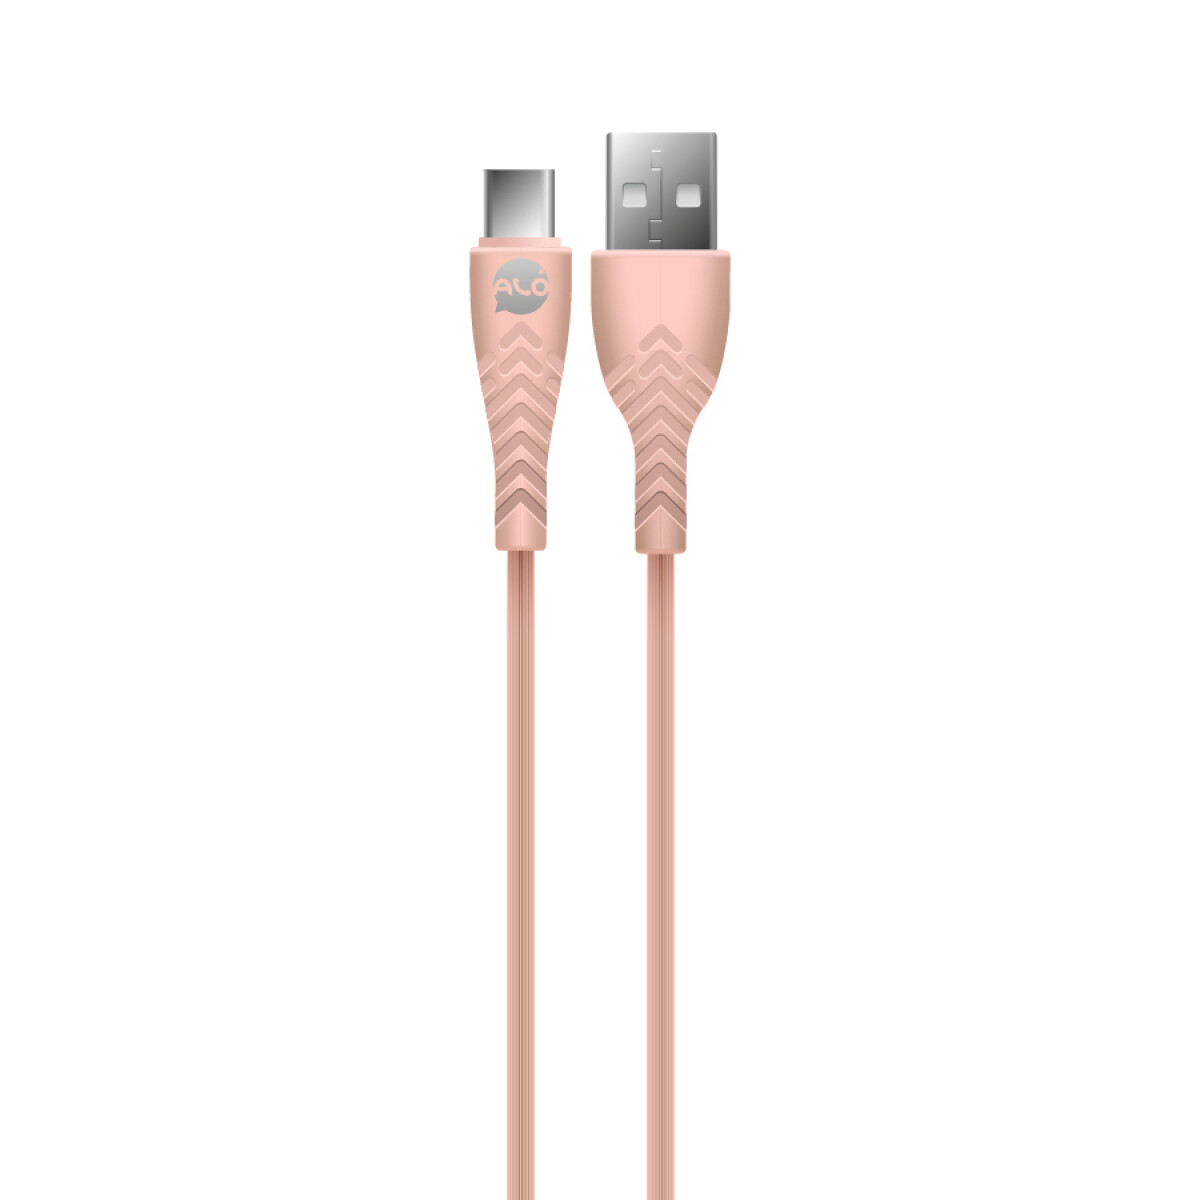 Cable MICRO USB 3.1A ALO FLASH 1 Metro - Pink sand 